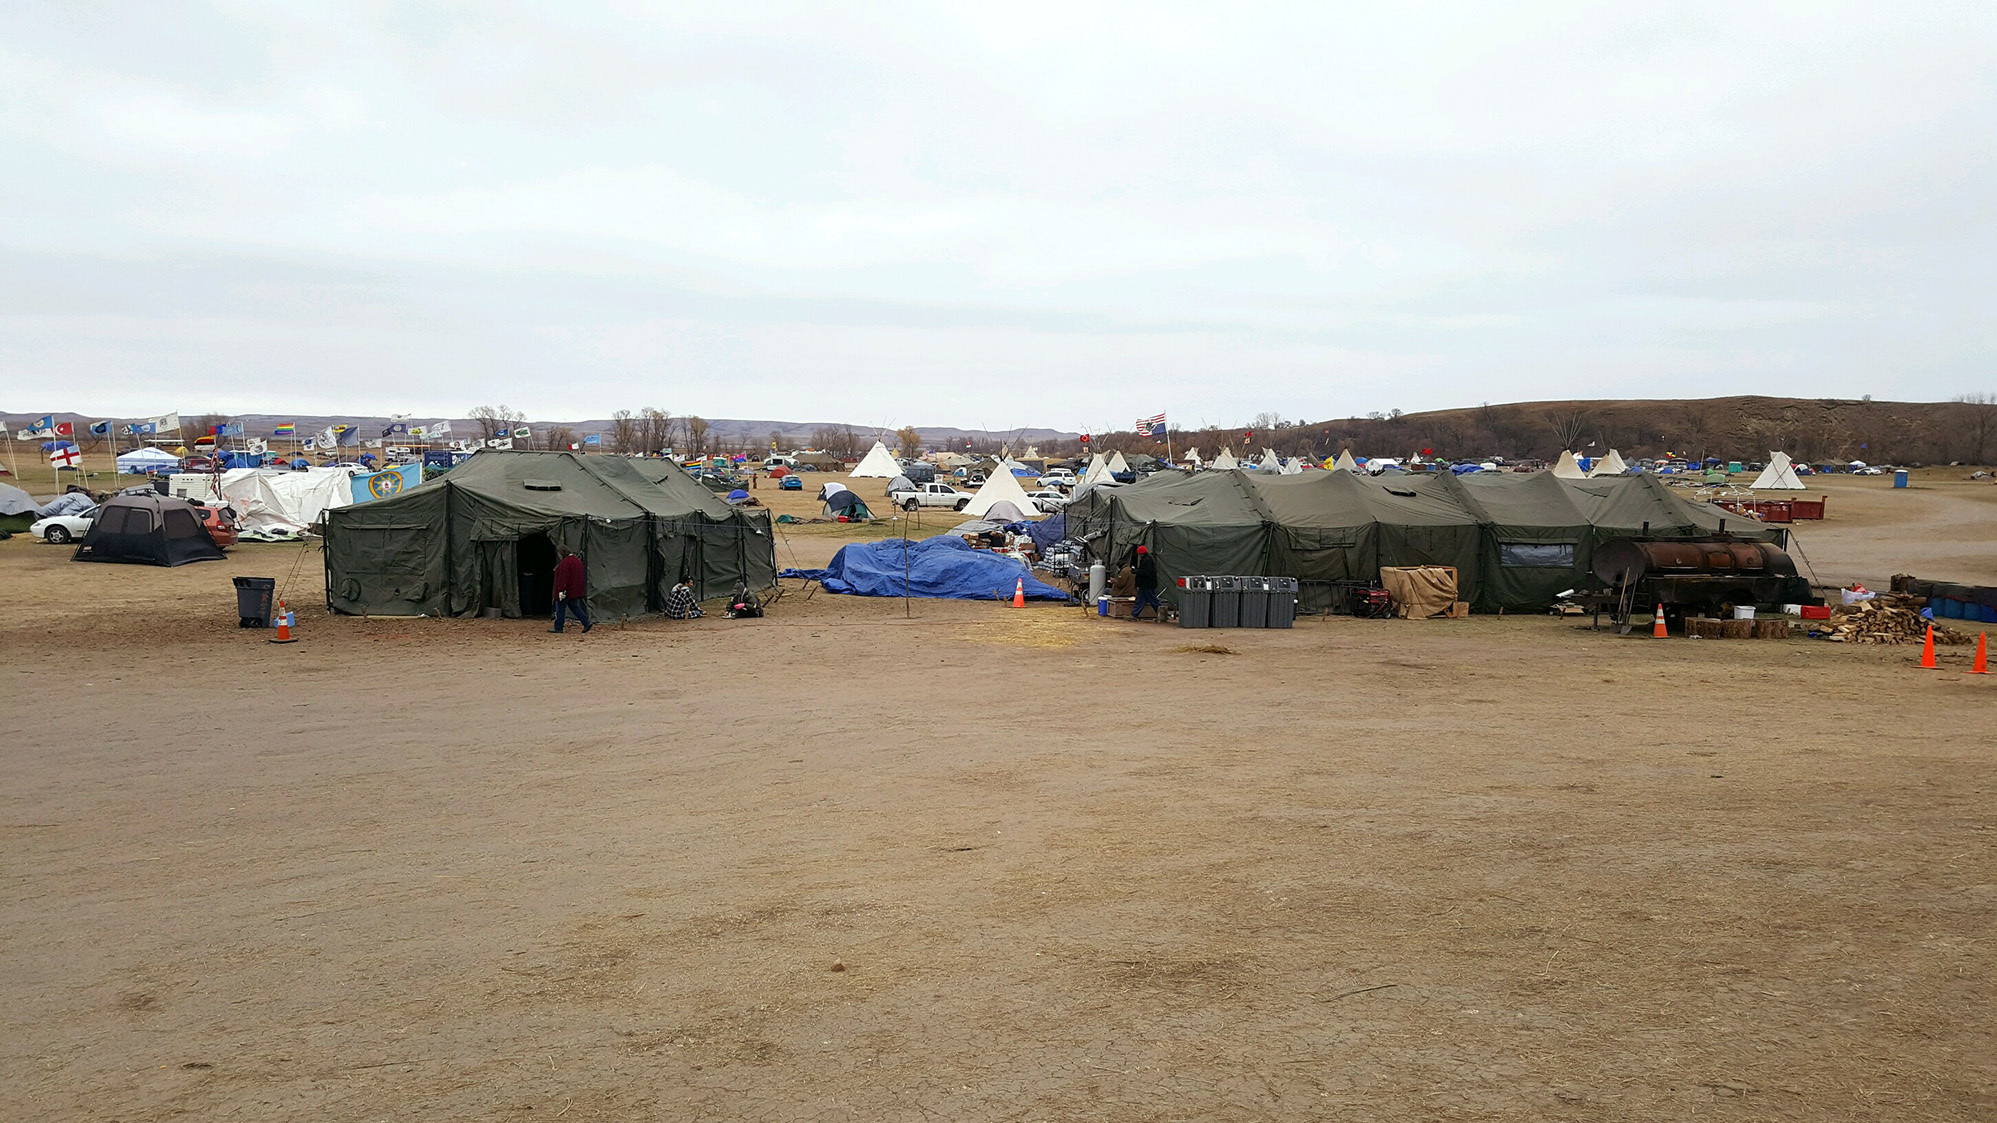 Tents at the Oceti Sakowin Camp. Yazzie estimates he saw about 1,500 people at the camp last weekend.